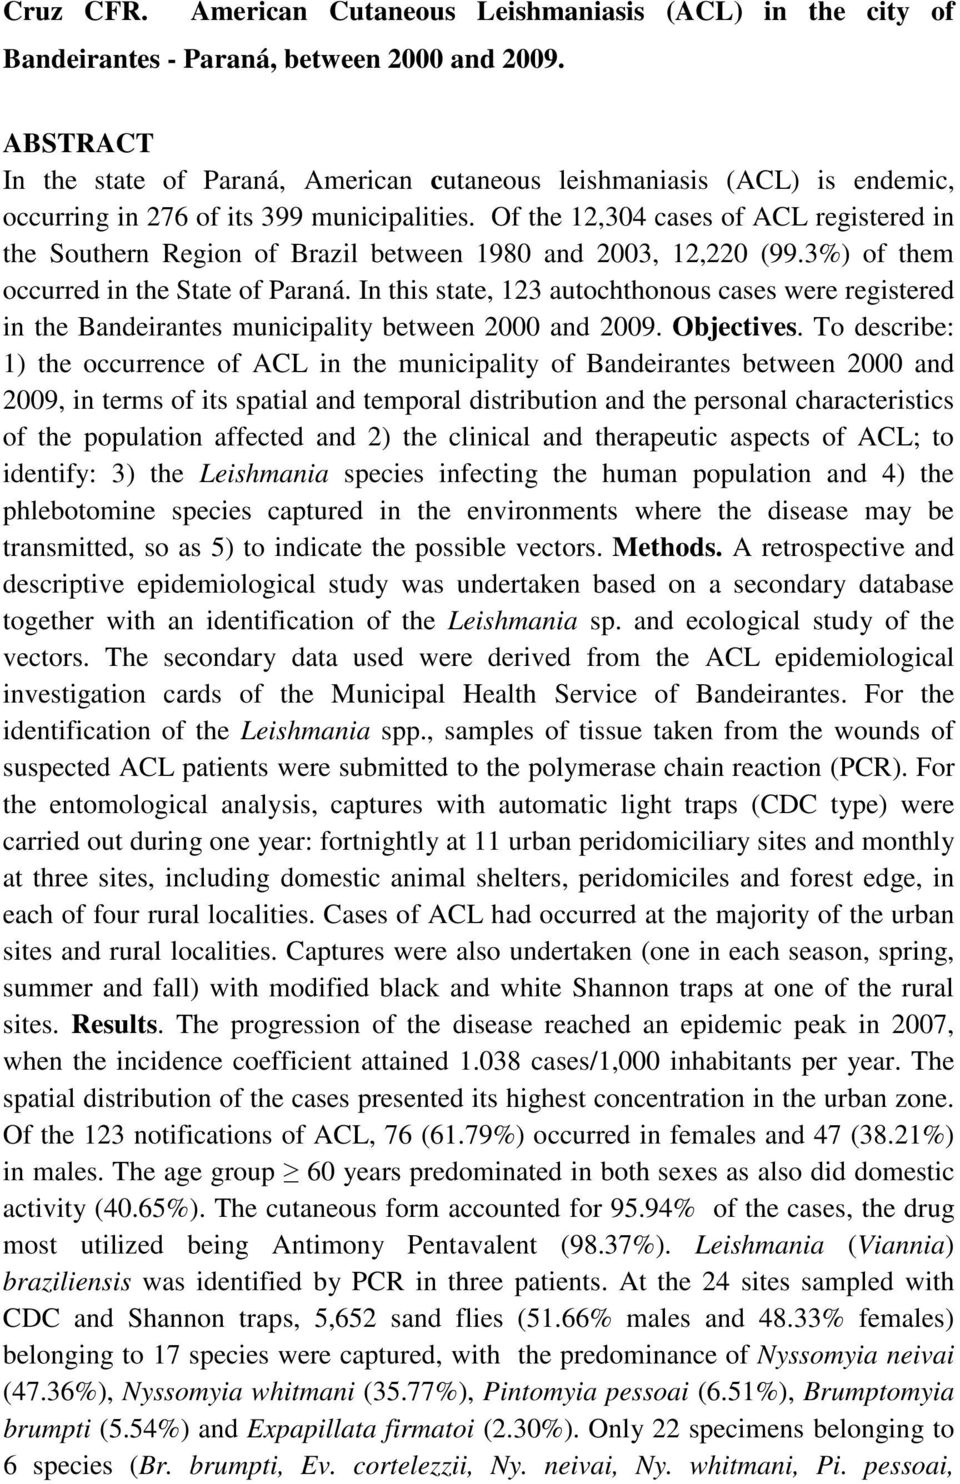 Of the 12,304 cases of ACL registered in the Southern Region of Brazil between 1980 and 2003, 12,220 (99.3%) of them occurred in the State of Paraná.